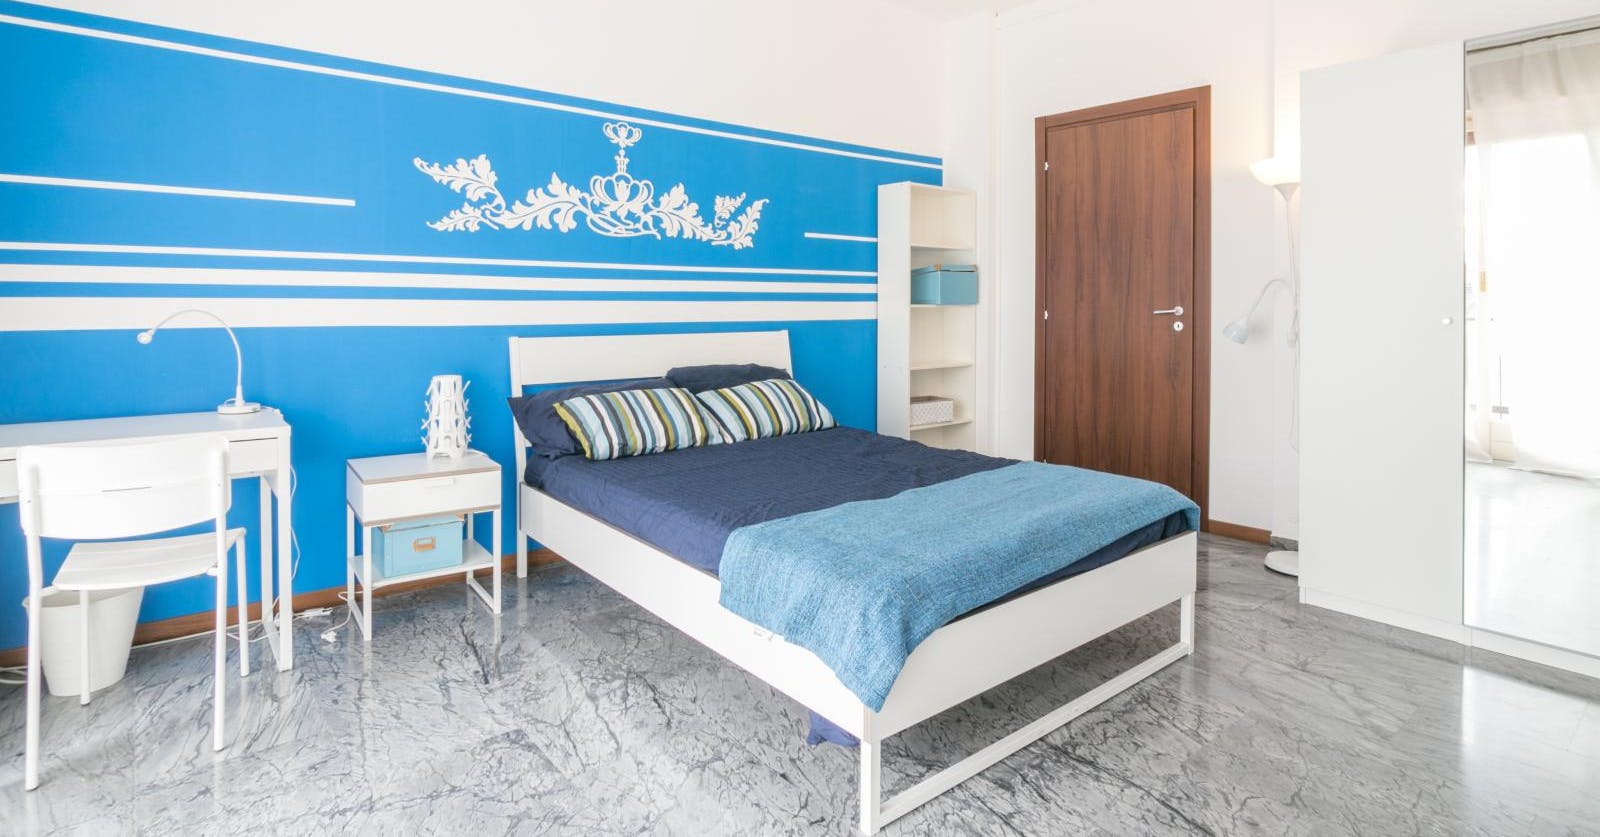 Appealing double bedroom close to Domus Academy